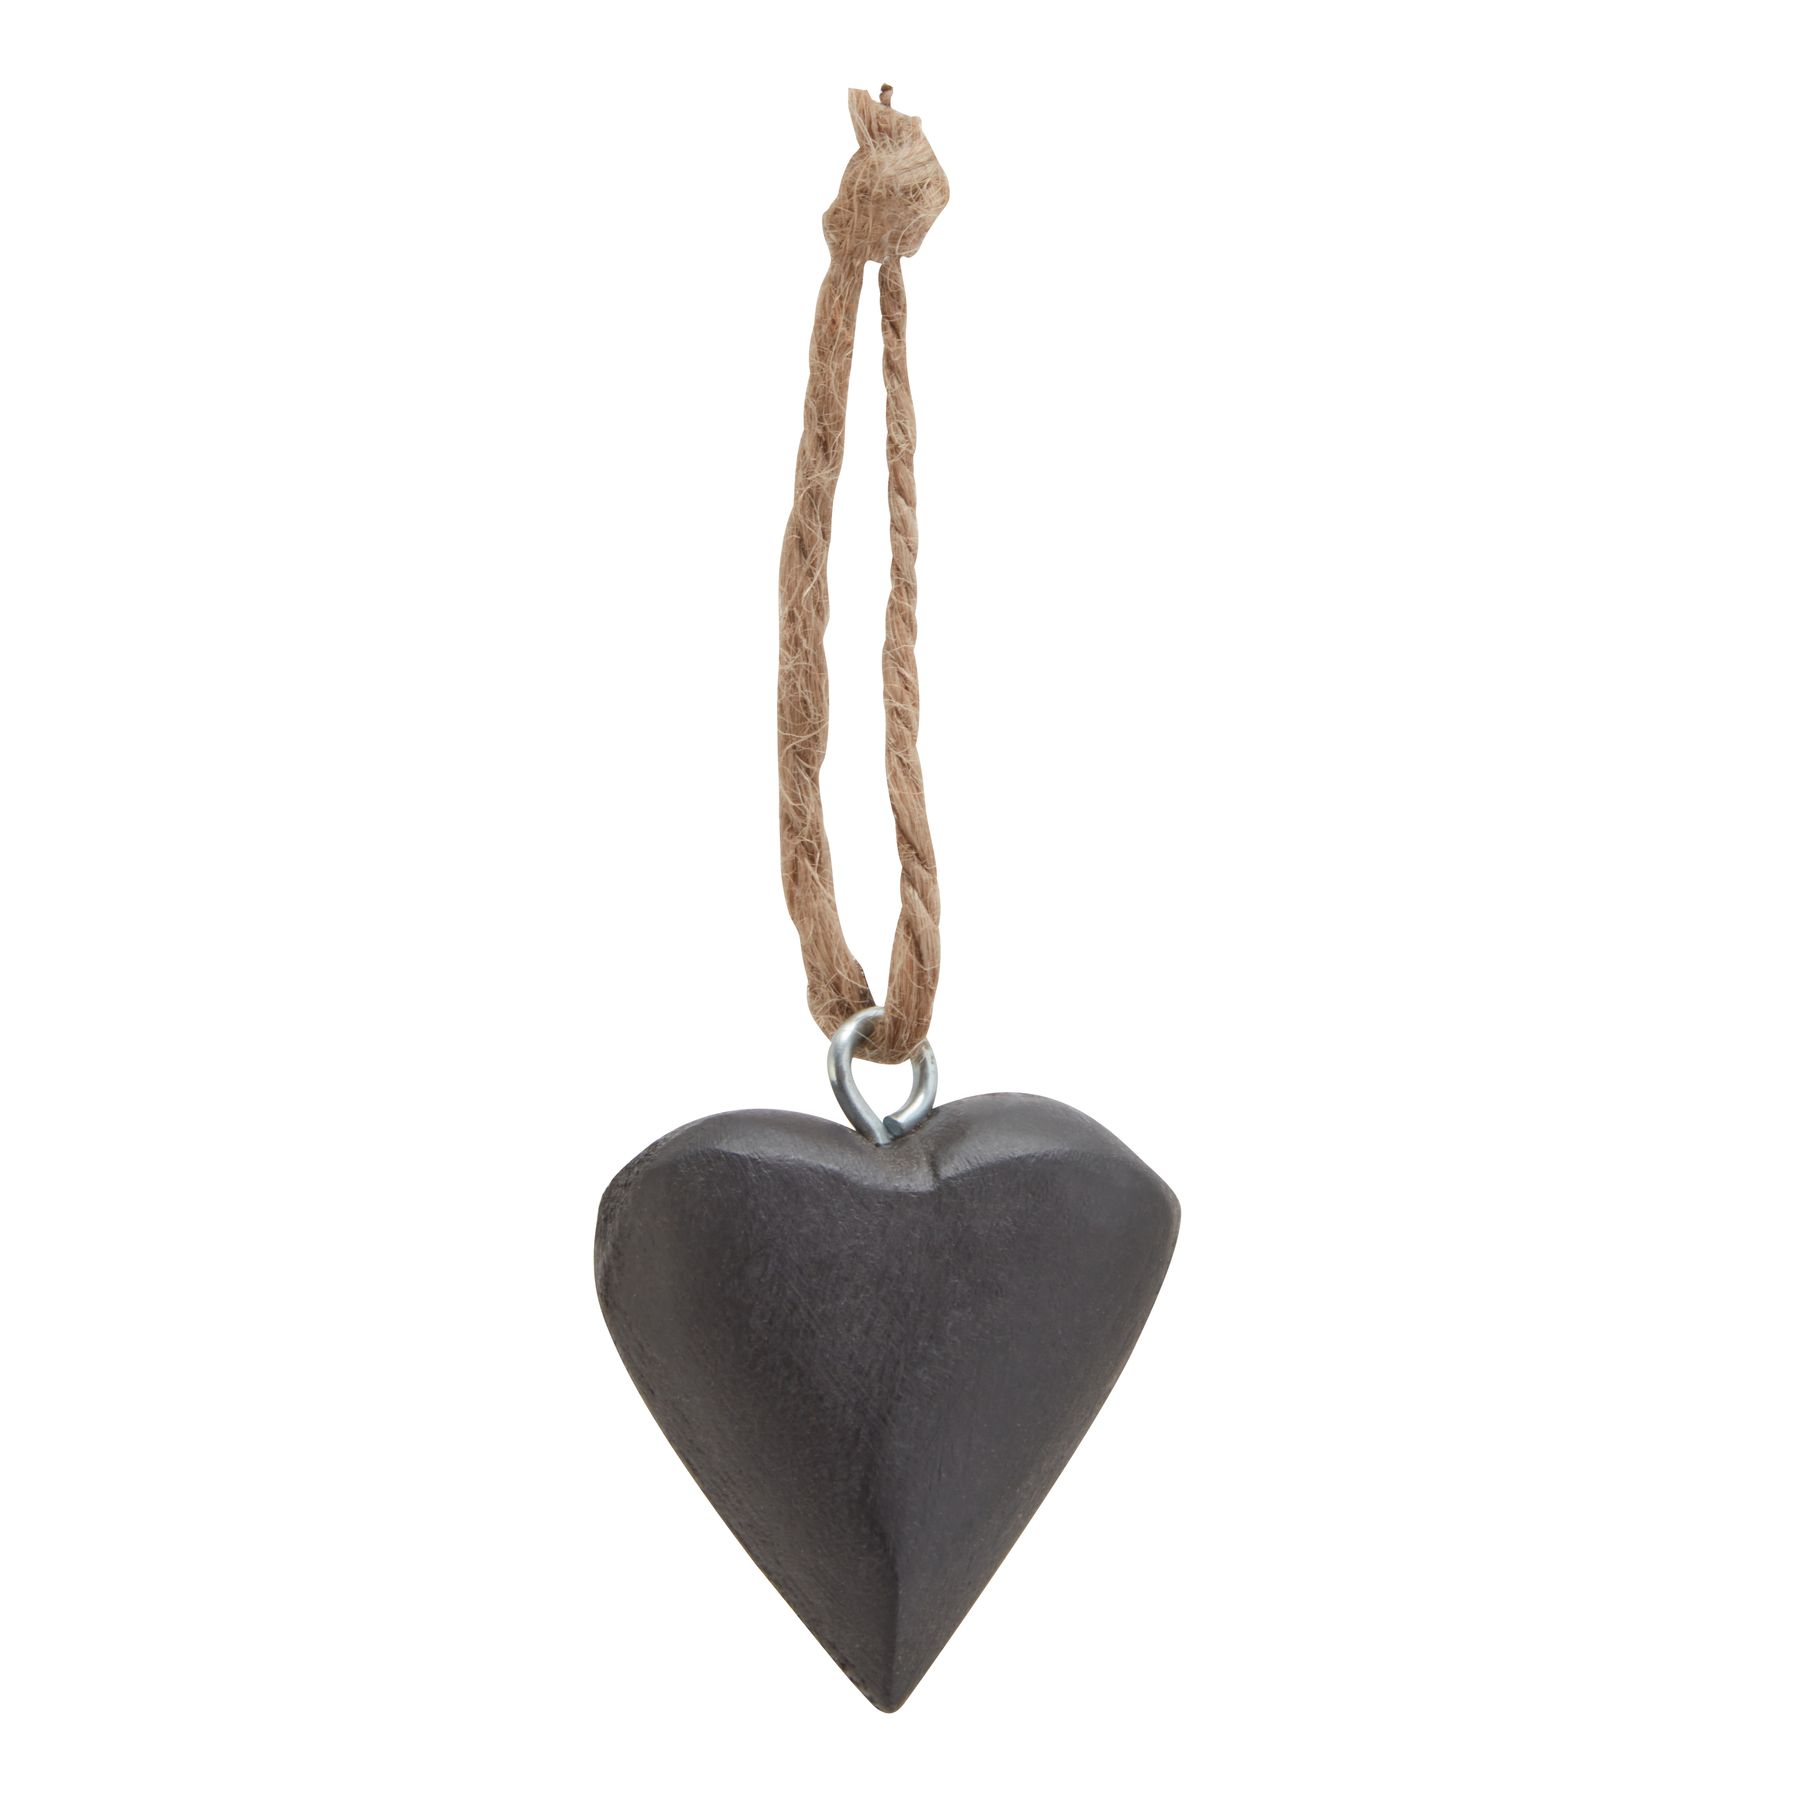 Pack Of 90 Wooden Heart Hanging Decorations - Image 4